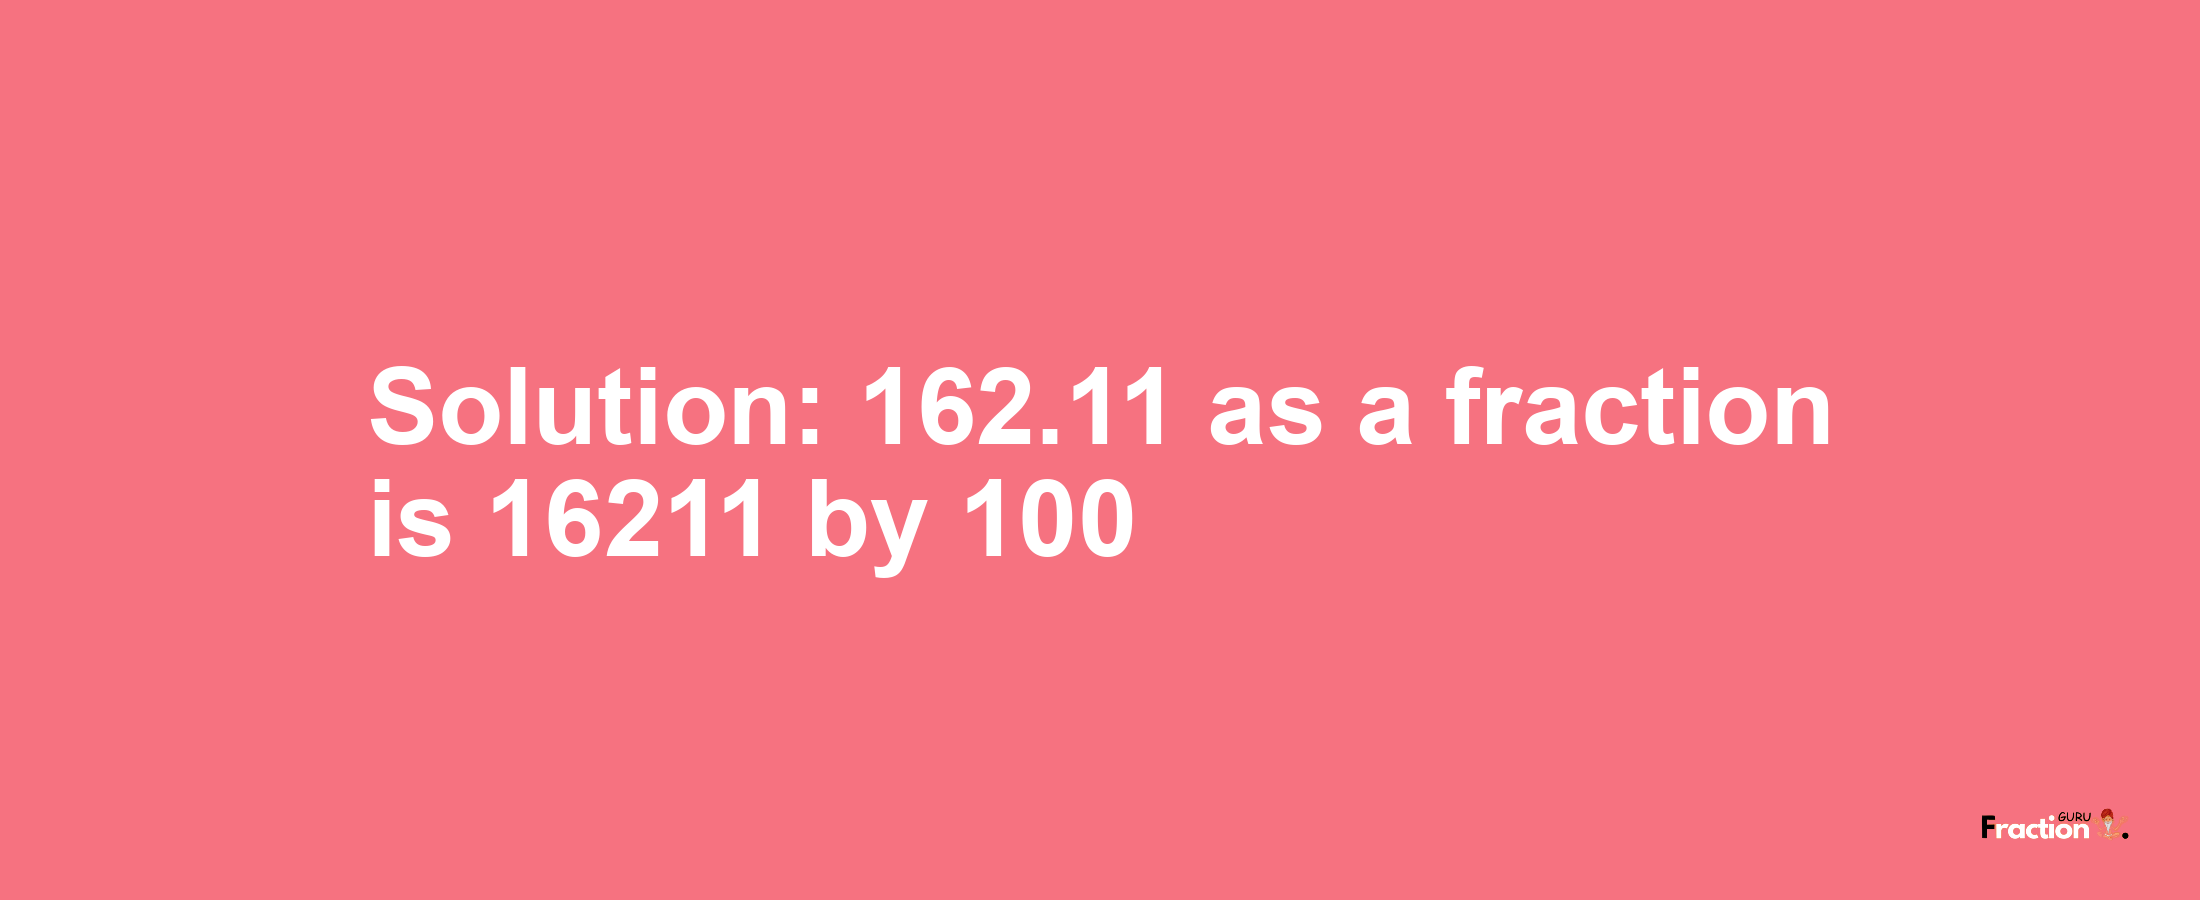 Solution:162.11 as a fraction is 16211/100